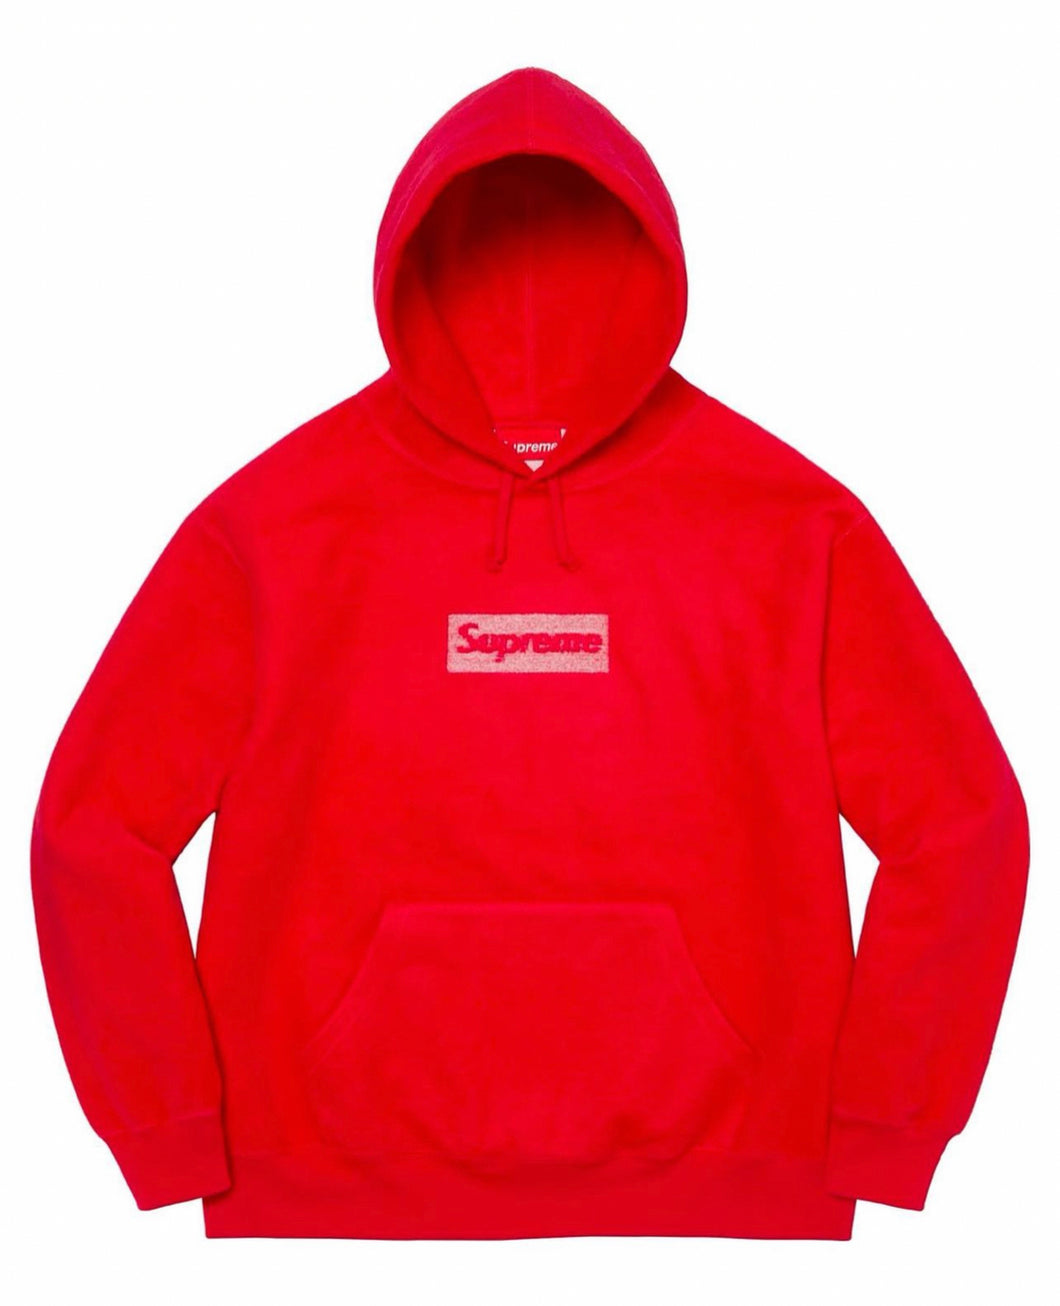 Supreme INSIDE OUT BOX LOGO HOODED SWEATSHIRT RED